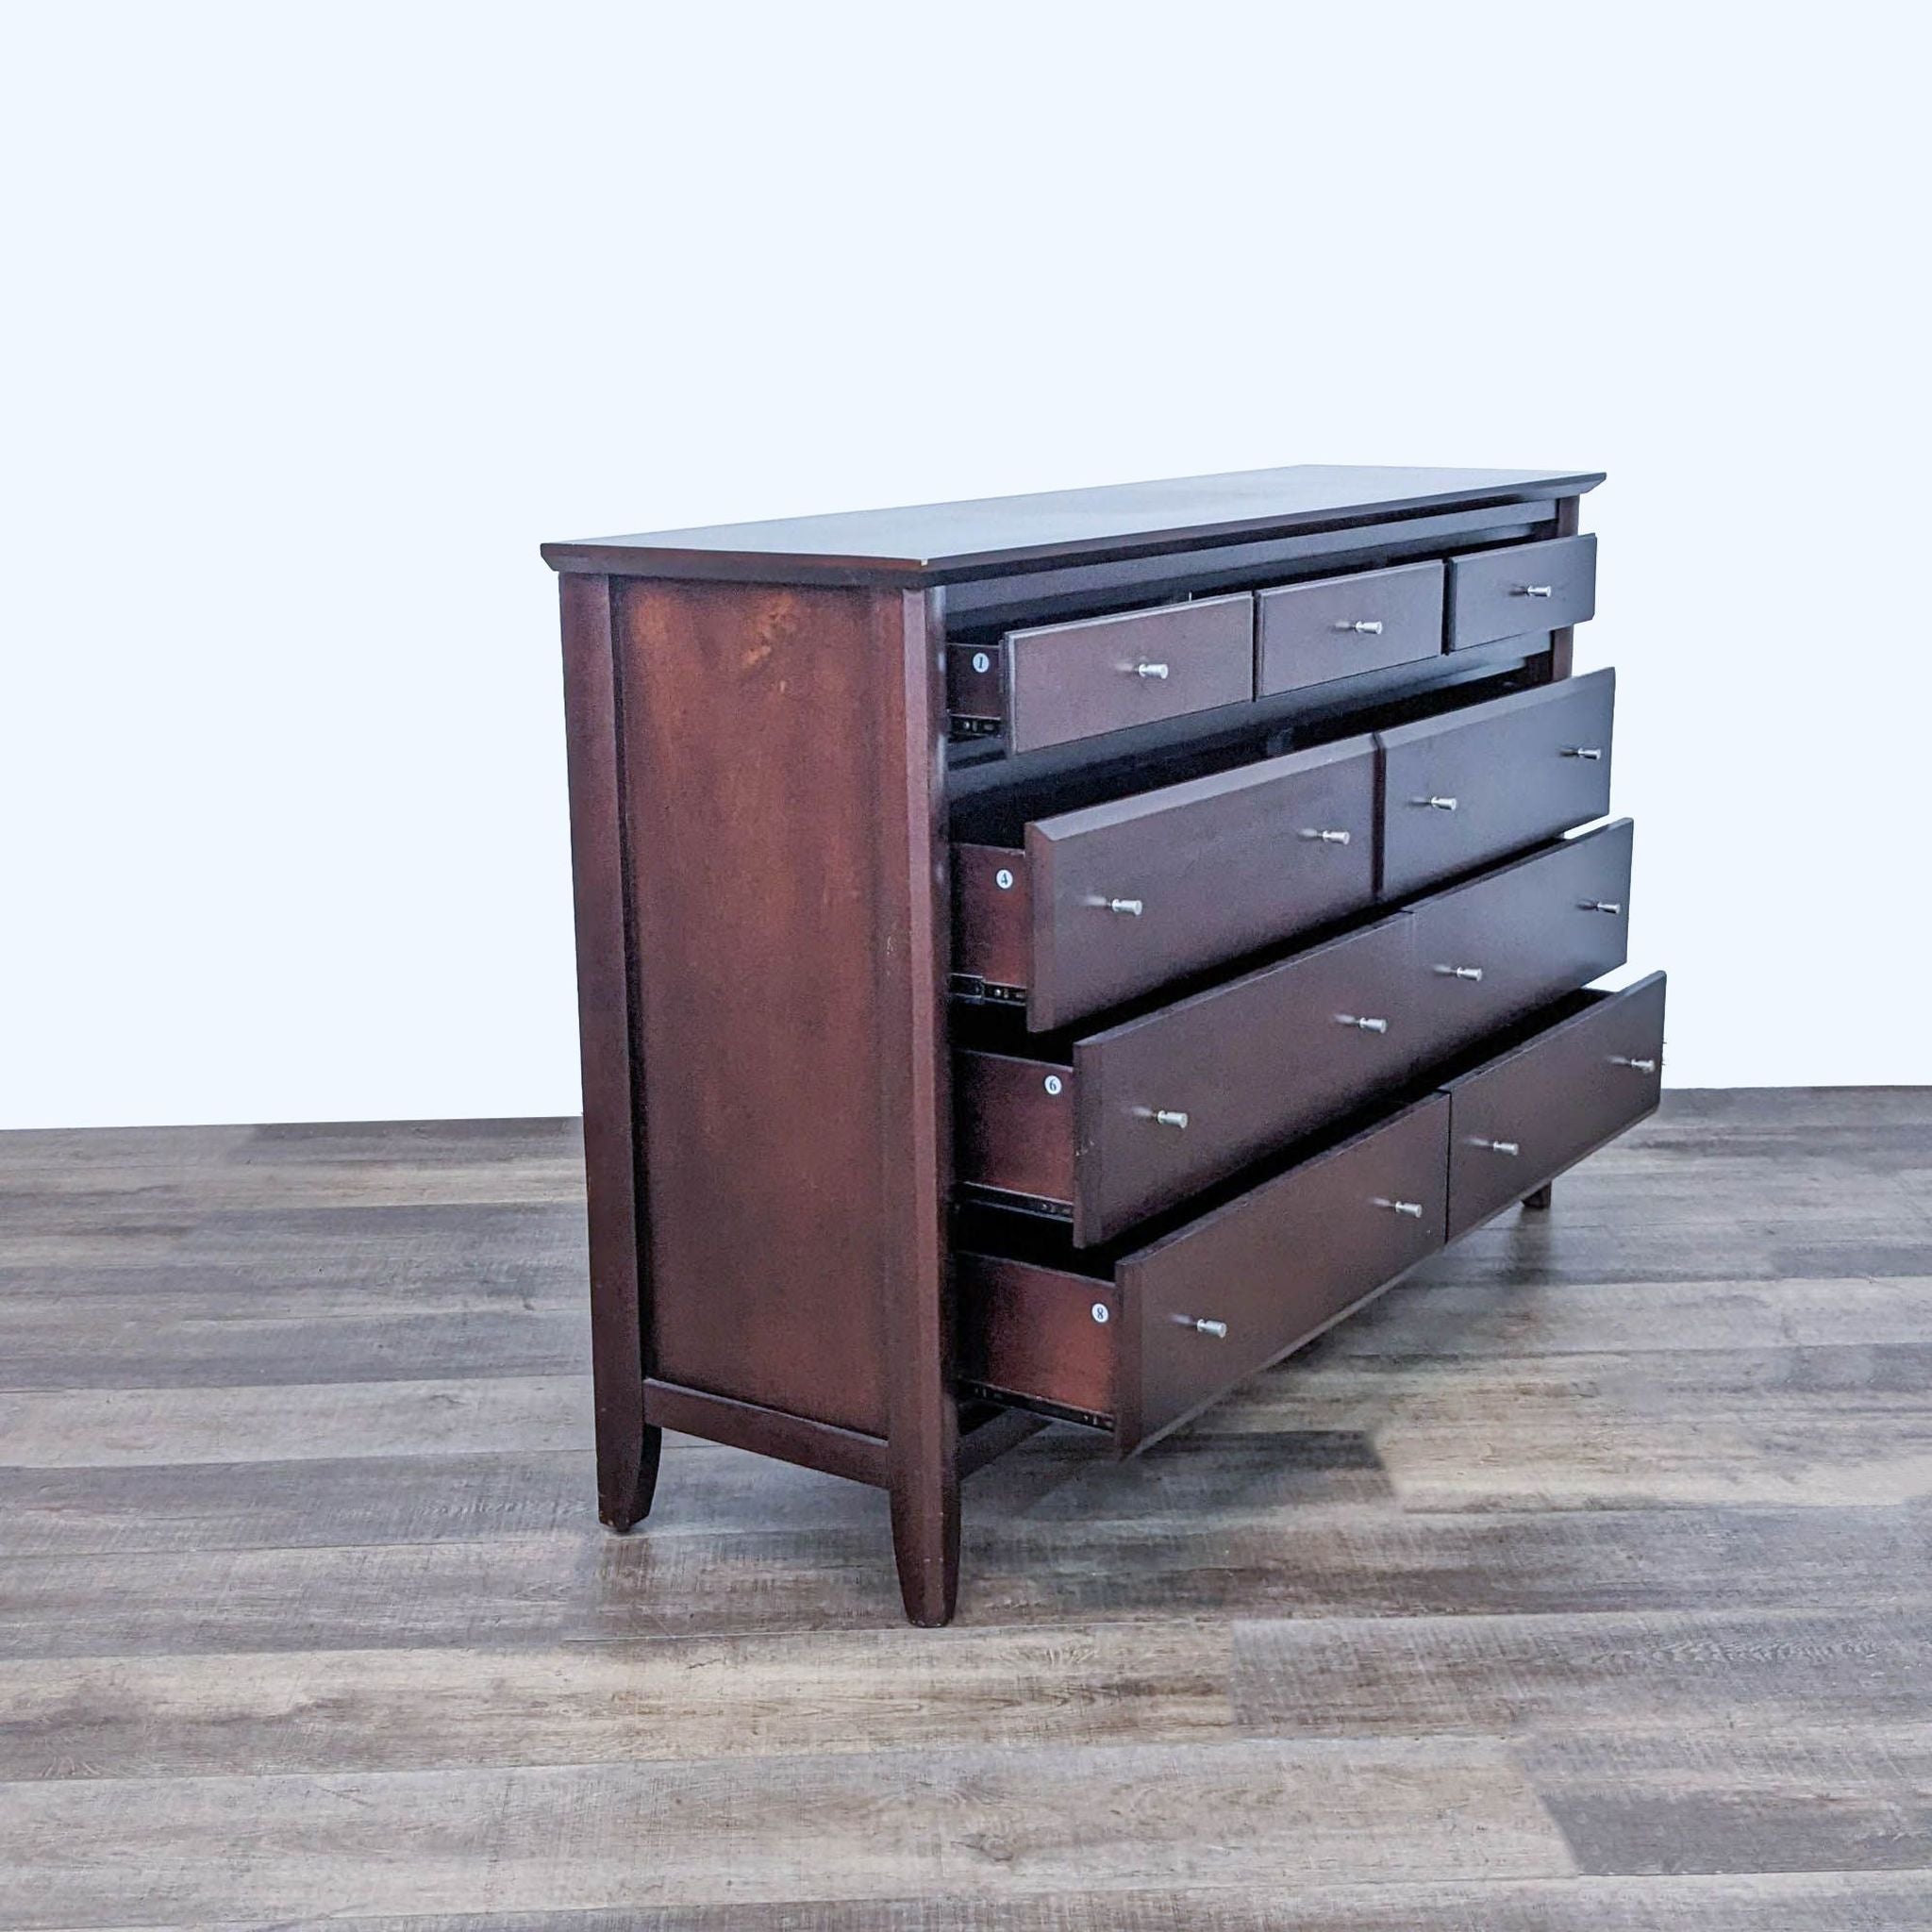 Front view of a Reperch walnut-finished dresser with three small and six large drawers, set on a wooden floor.